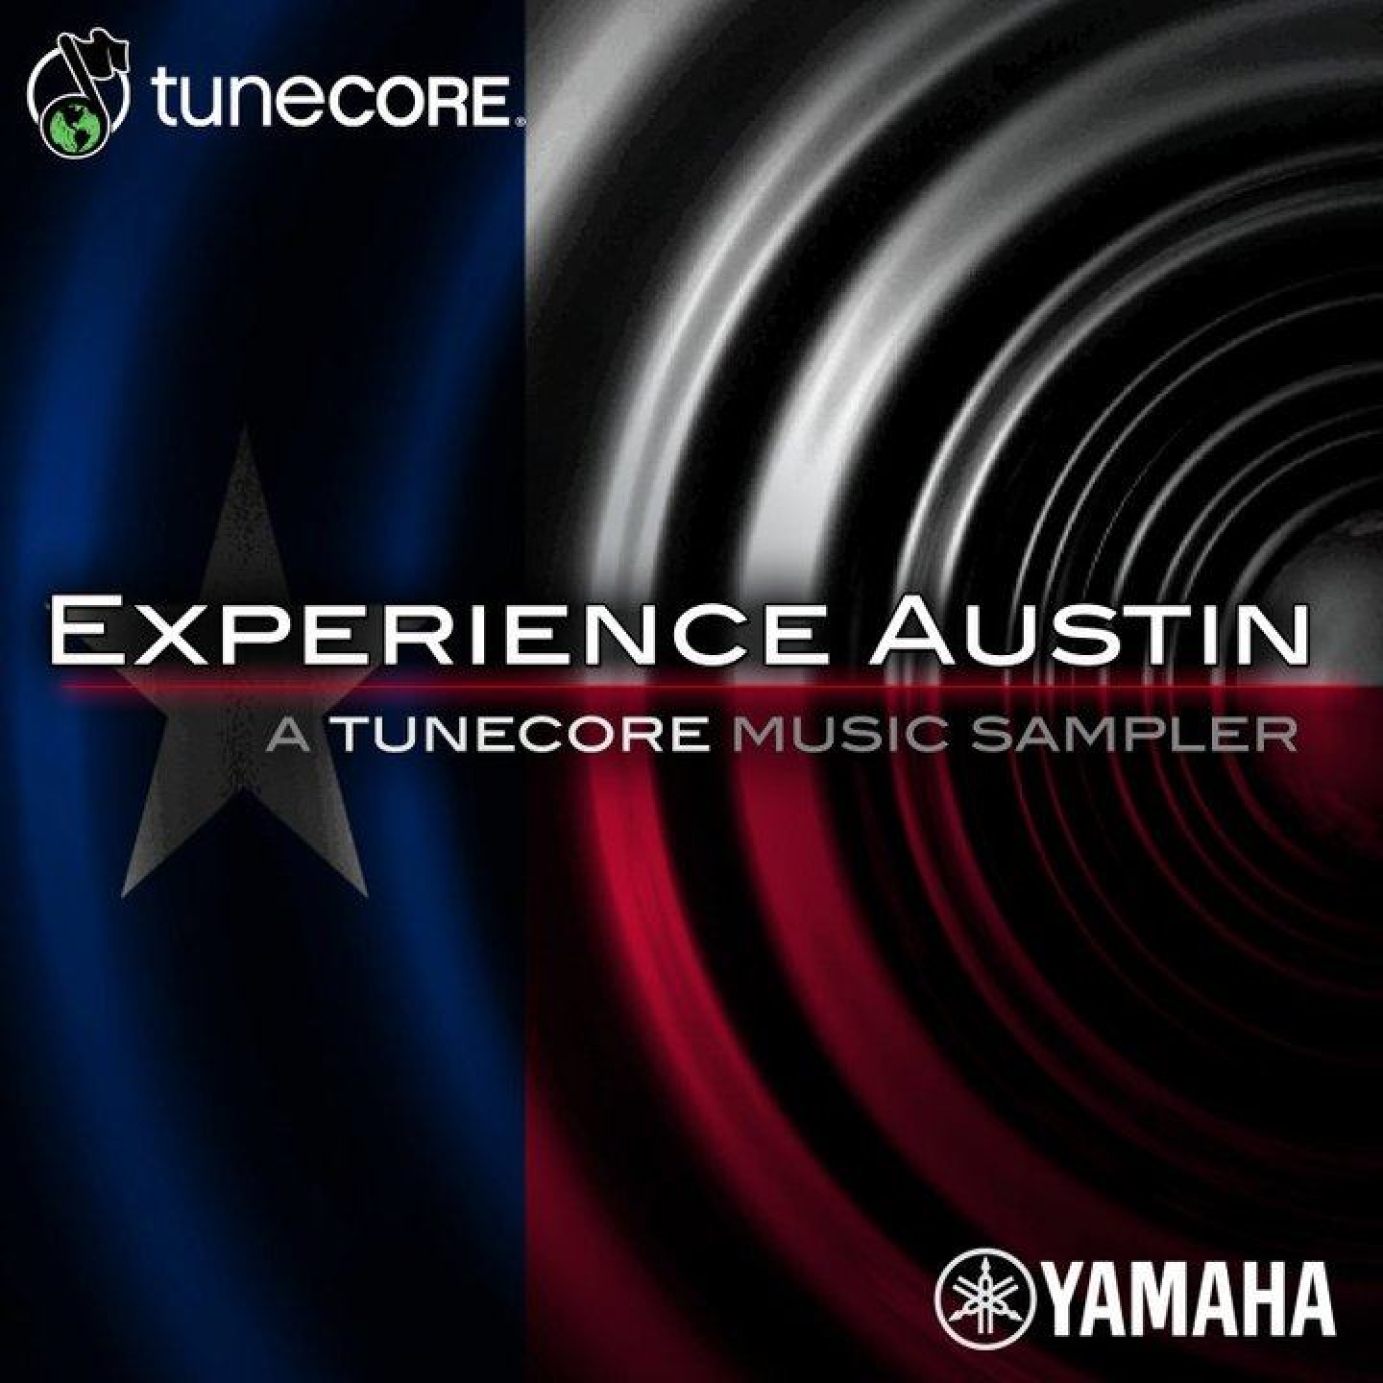 They wanted something simple to highlight artists from Austin, as well as use the Yamaha music sponsor on this design